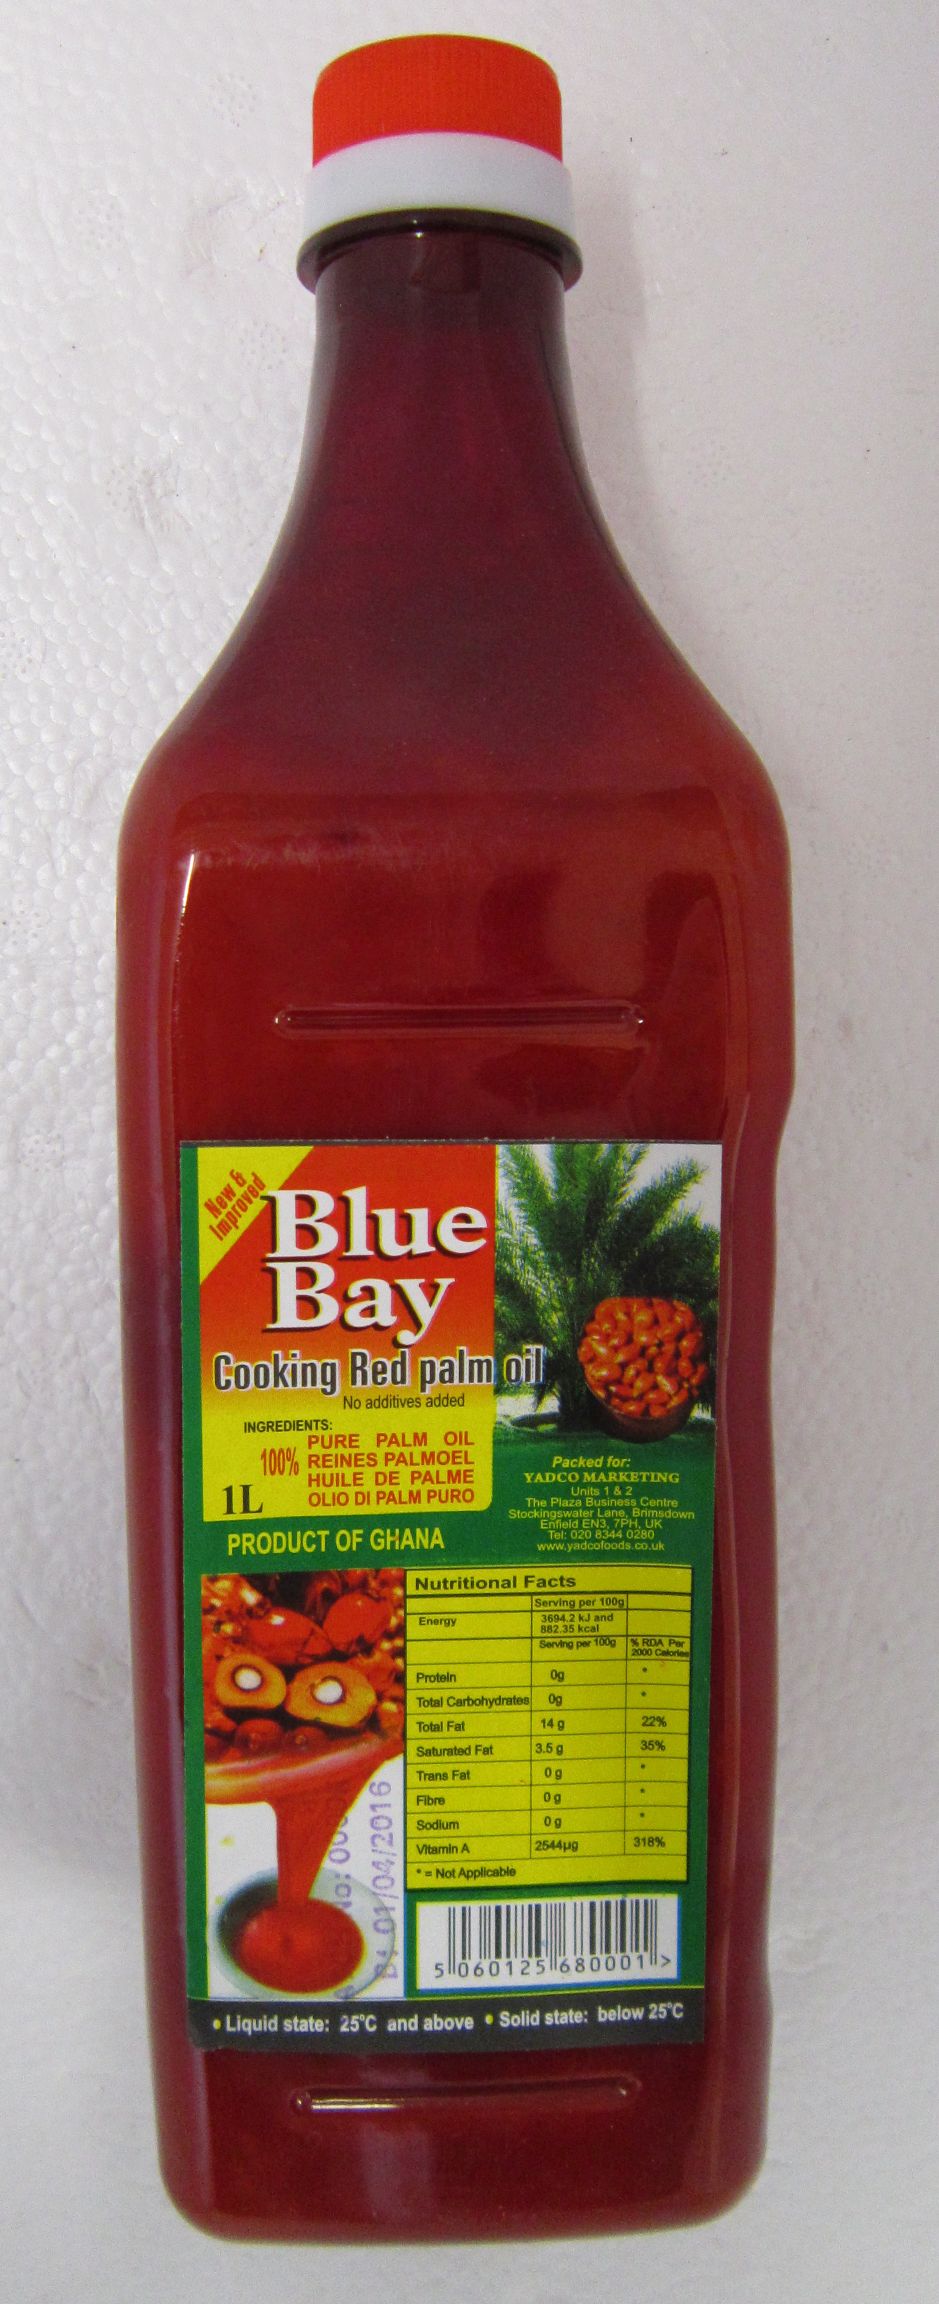 Blue Bay Cooking Red Palm Oil Image